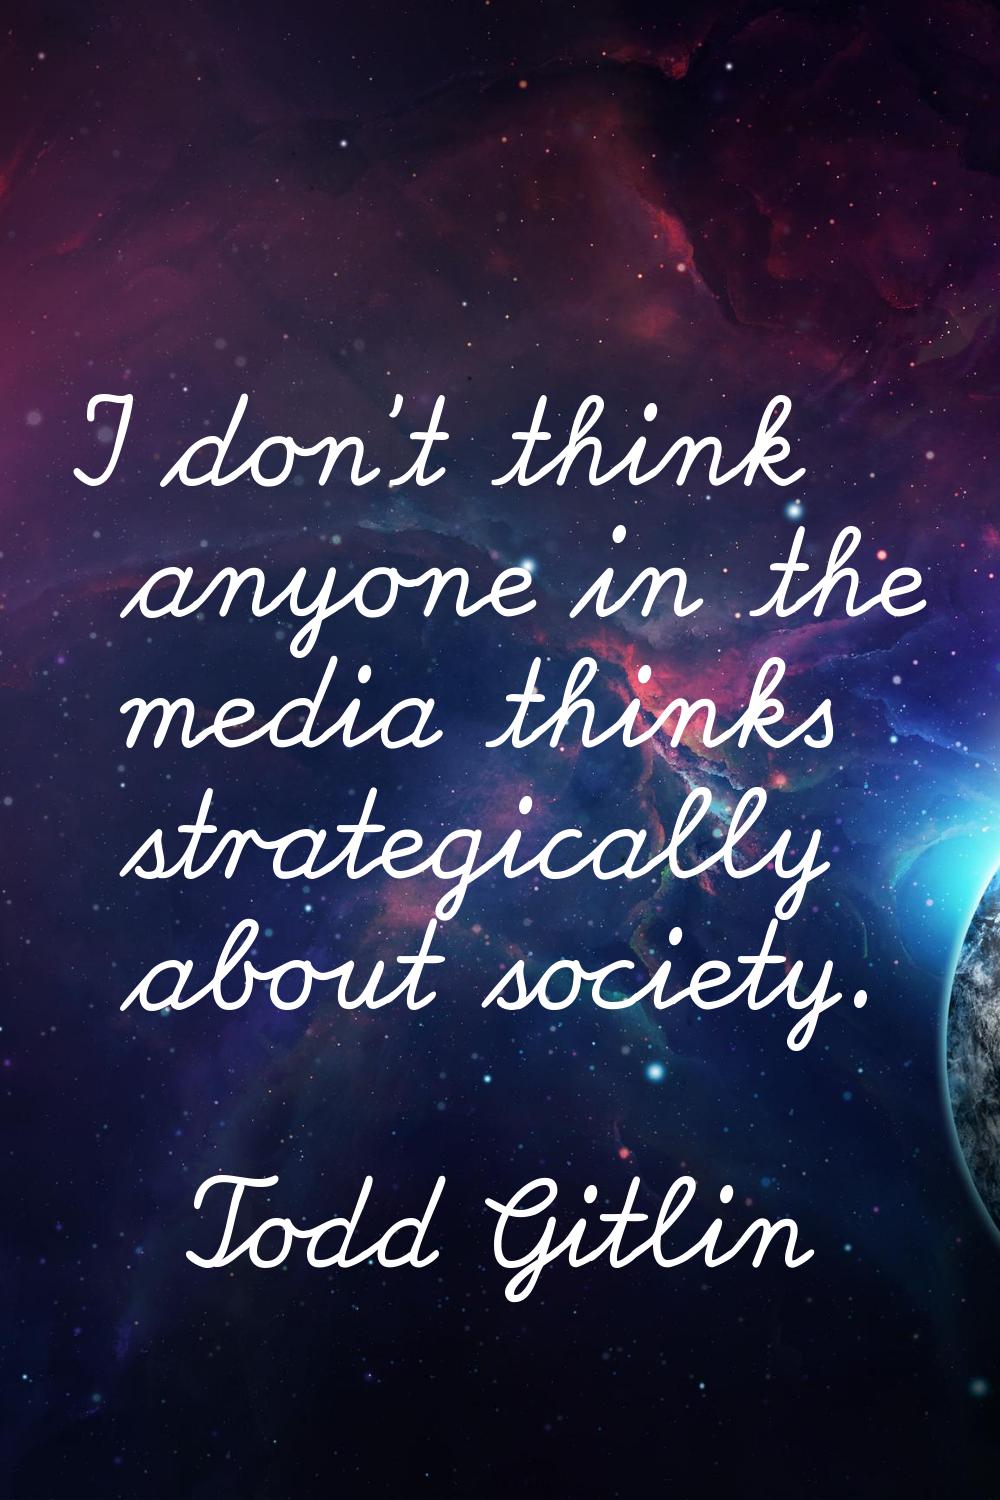 I don't think anyone in the media thinks strategically about society.